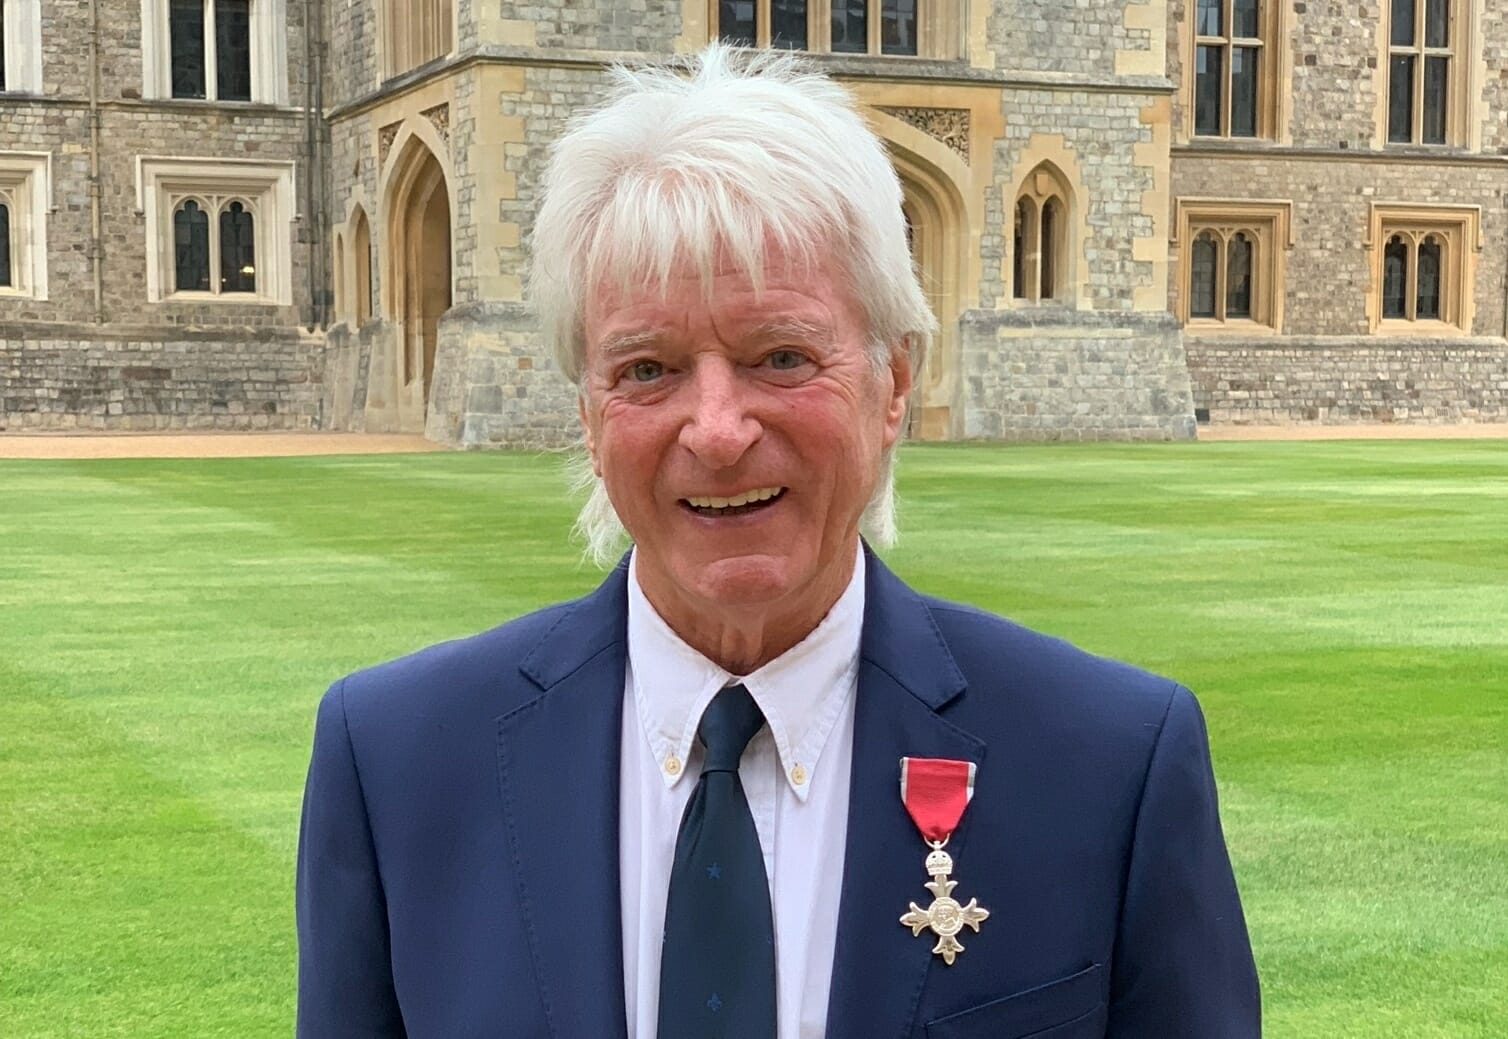 Manchester United legend Willie Morgan picked up his MBE for services to charity at Windsor Castle on Wednesday, October 11. Picture: Kay Morgan